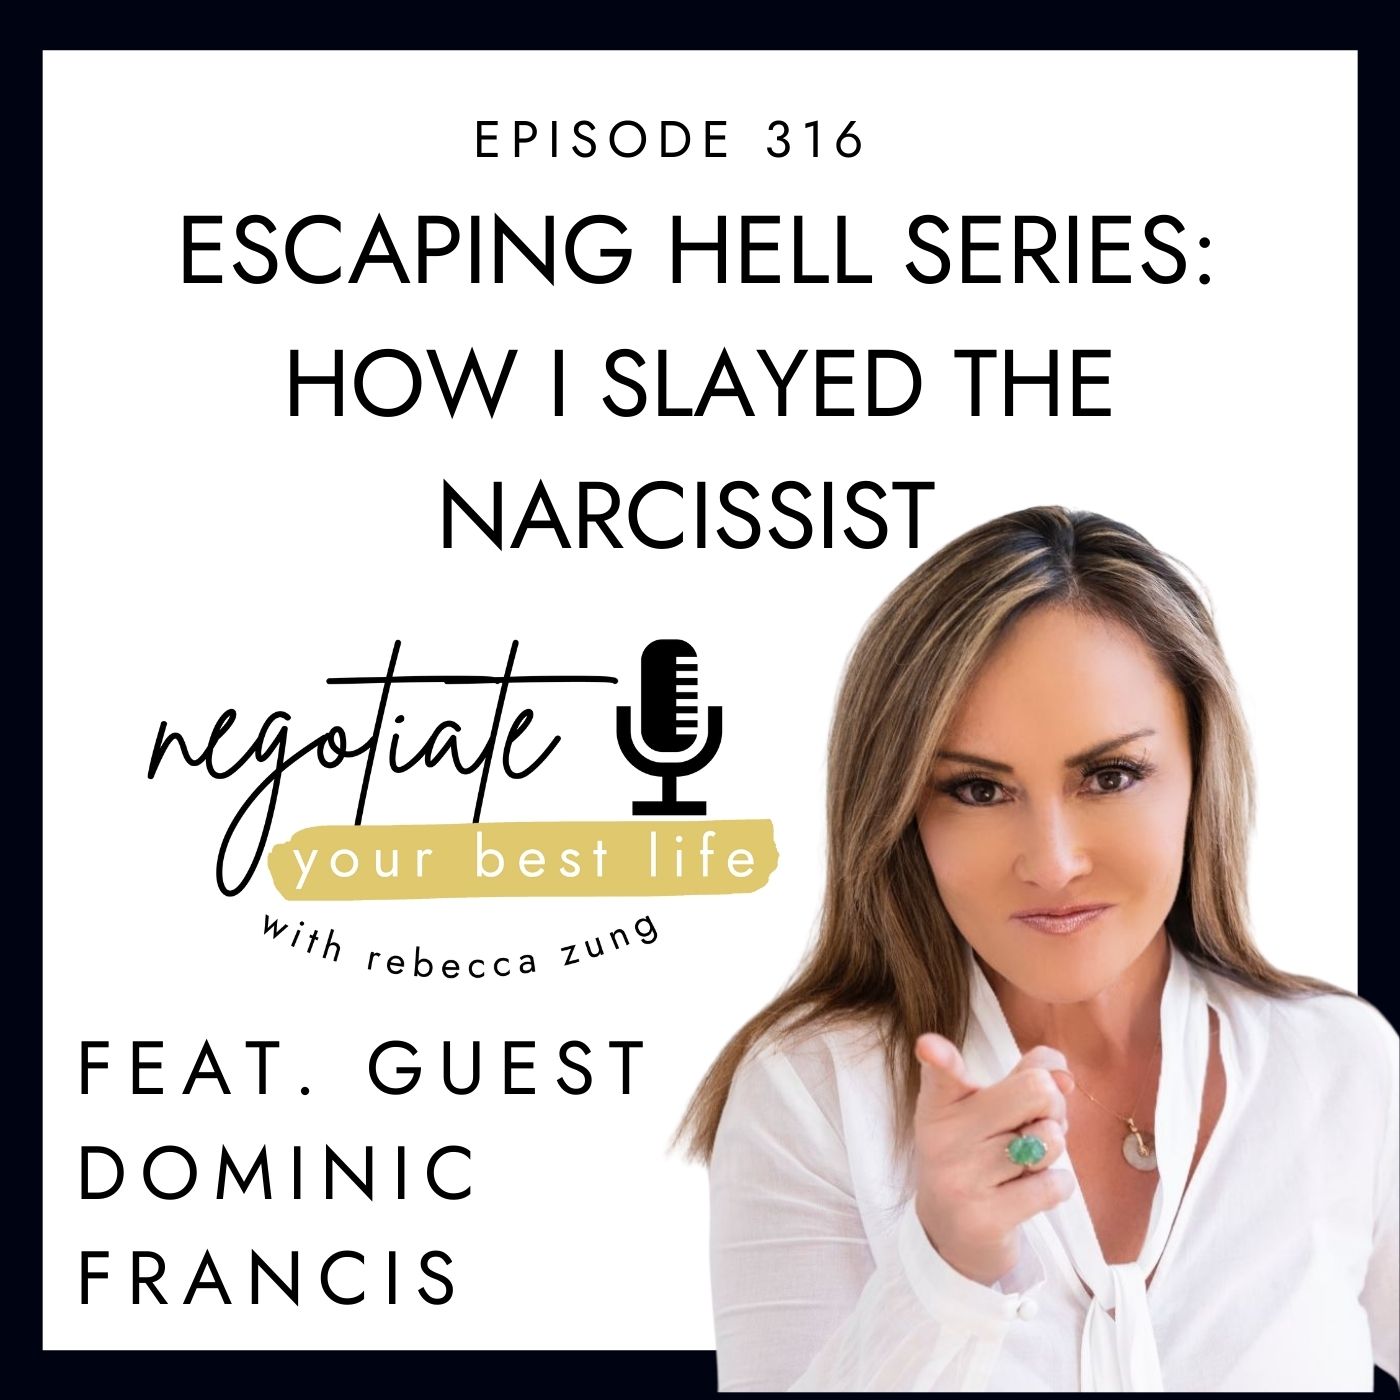 Escaping Hell Series:  How I Slayed the Narcissist with Dominic Francis on Negotiate Your Best Life with Rebecca Zung #316